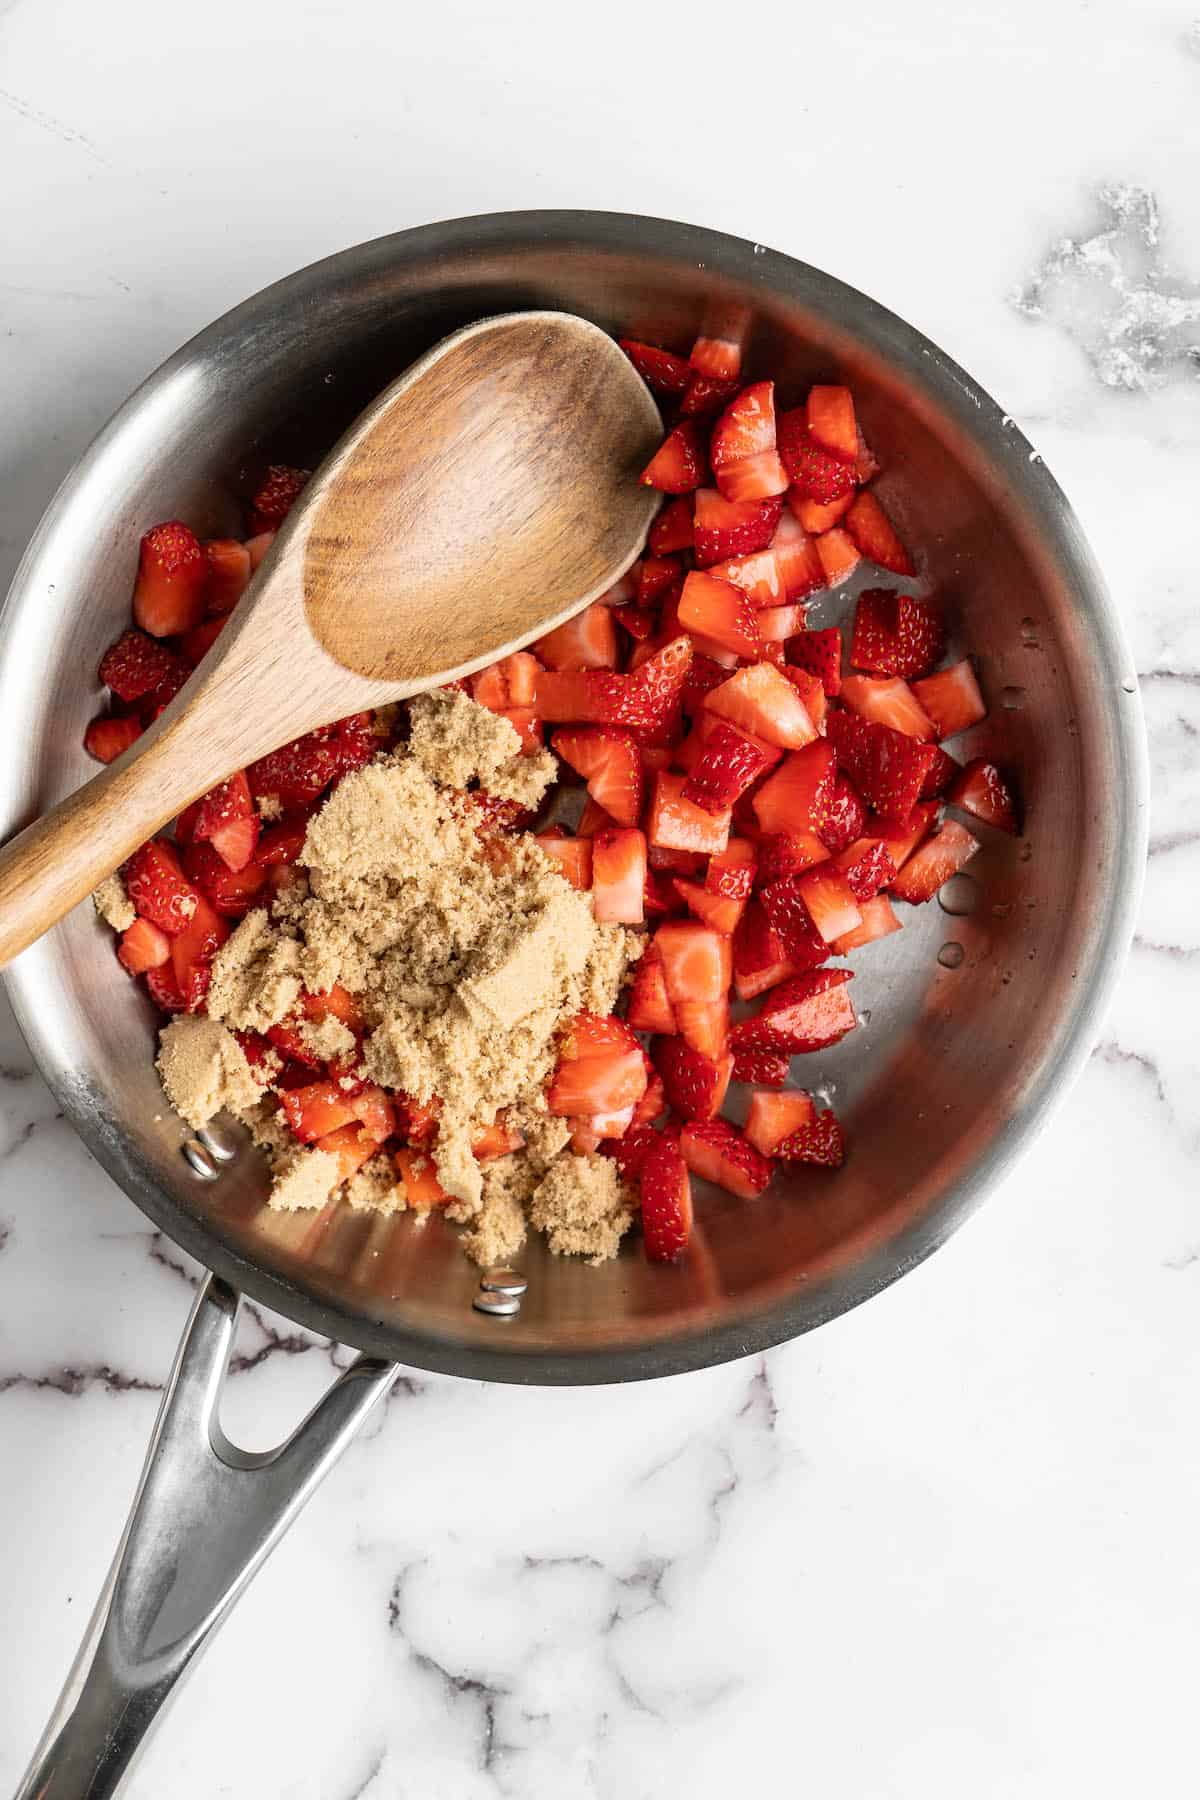 Overhead view of strawberries and brown sugar in pan with wooden spoon